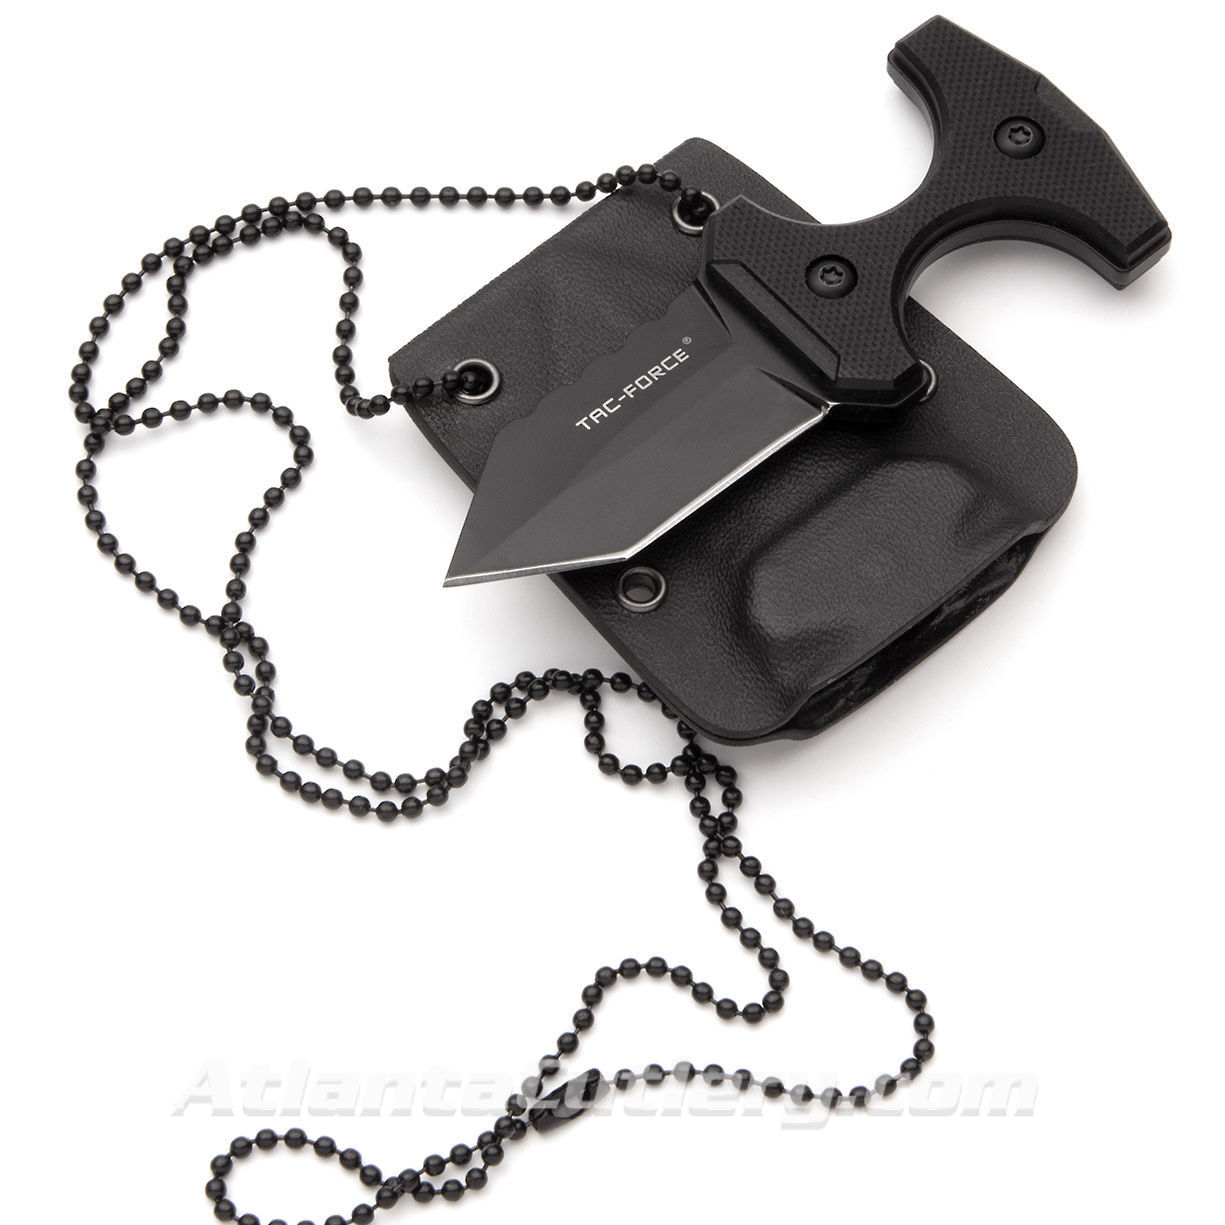 Tac Force Tactical Neck Knife with kydex sheath and ball chain, has full tang black blade and G10 handles